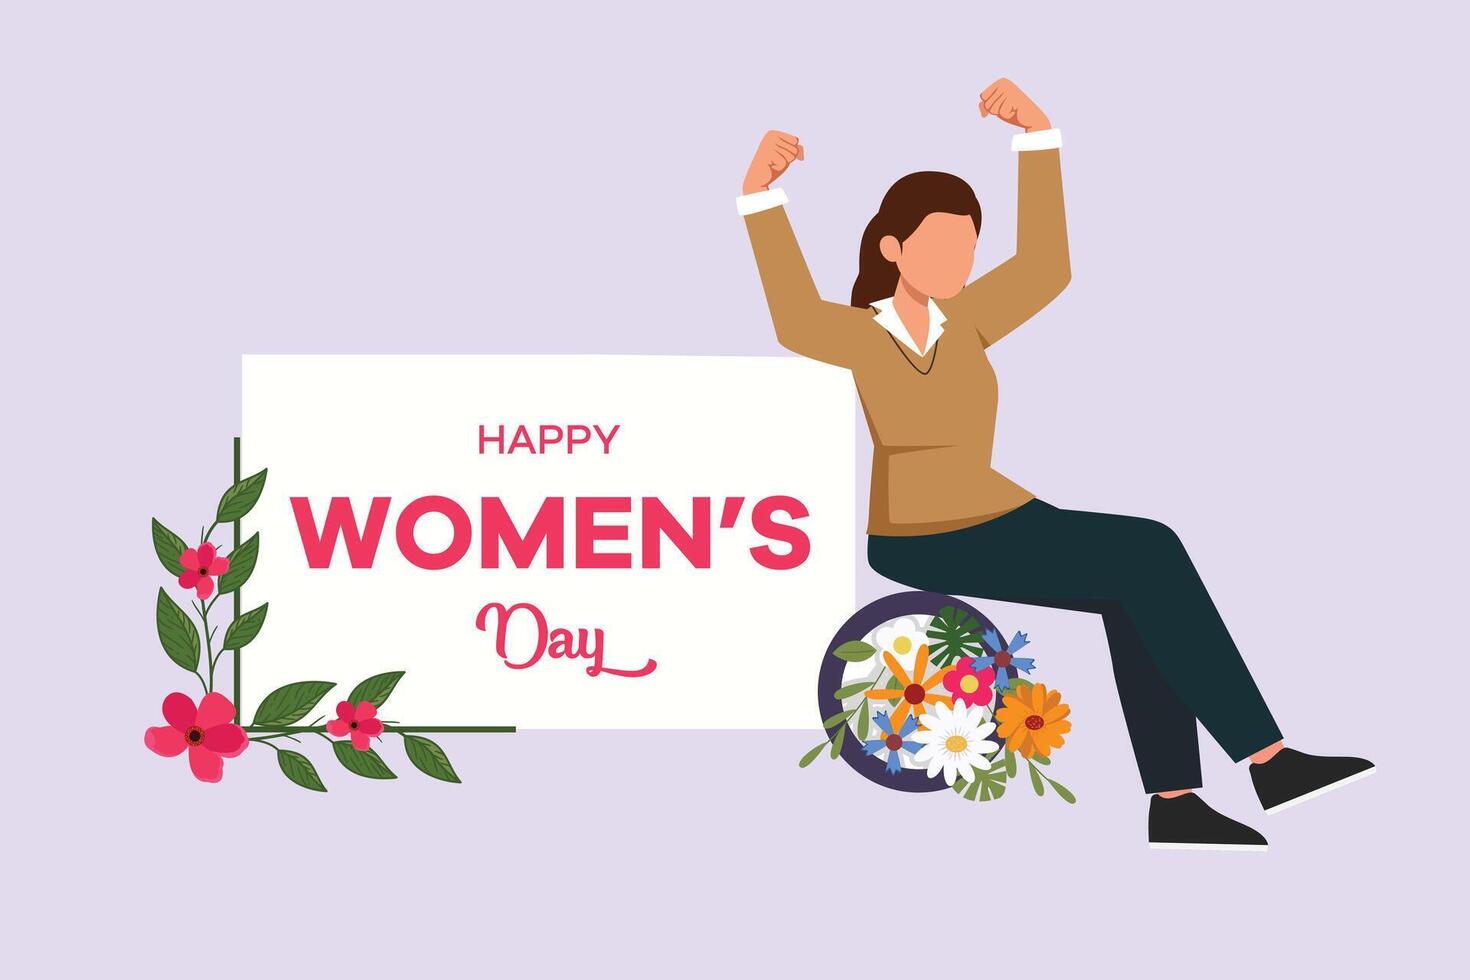 International Women's Day concept. Colored flat vector illustration isolated.